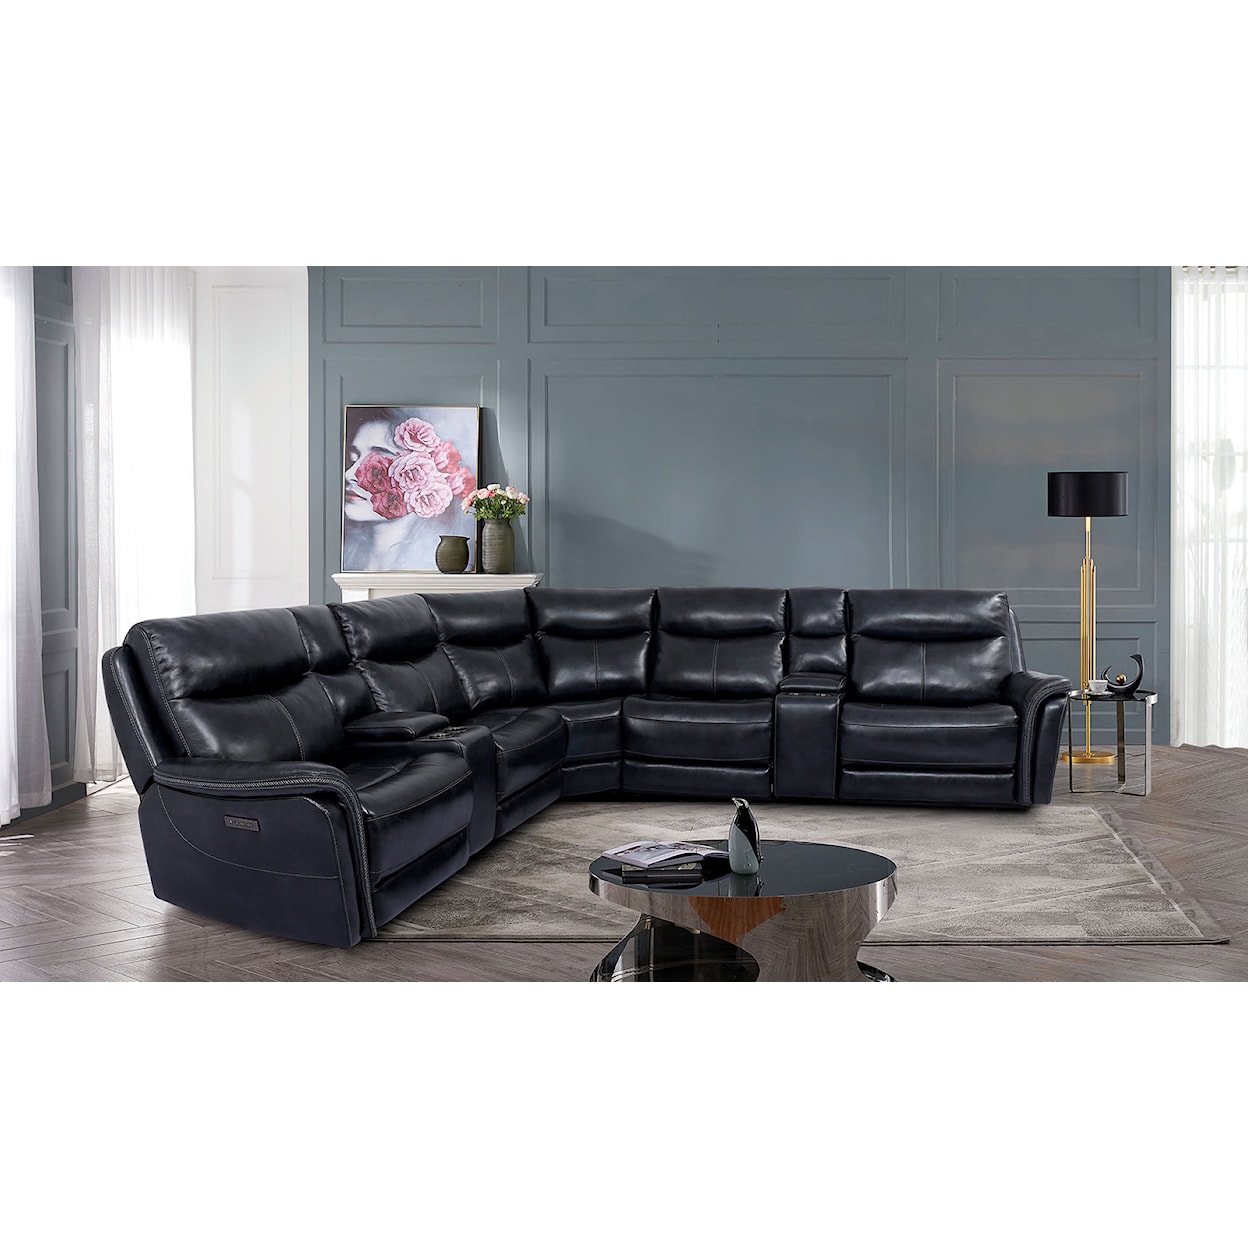 FUSA Braylee Power Sectional